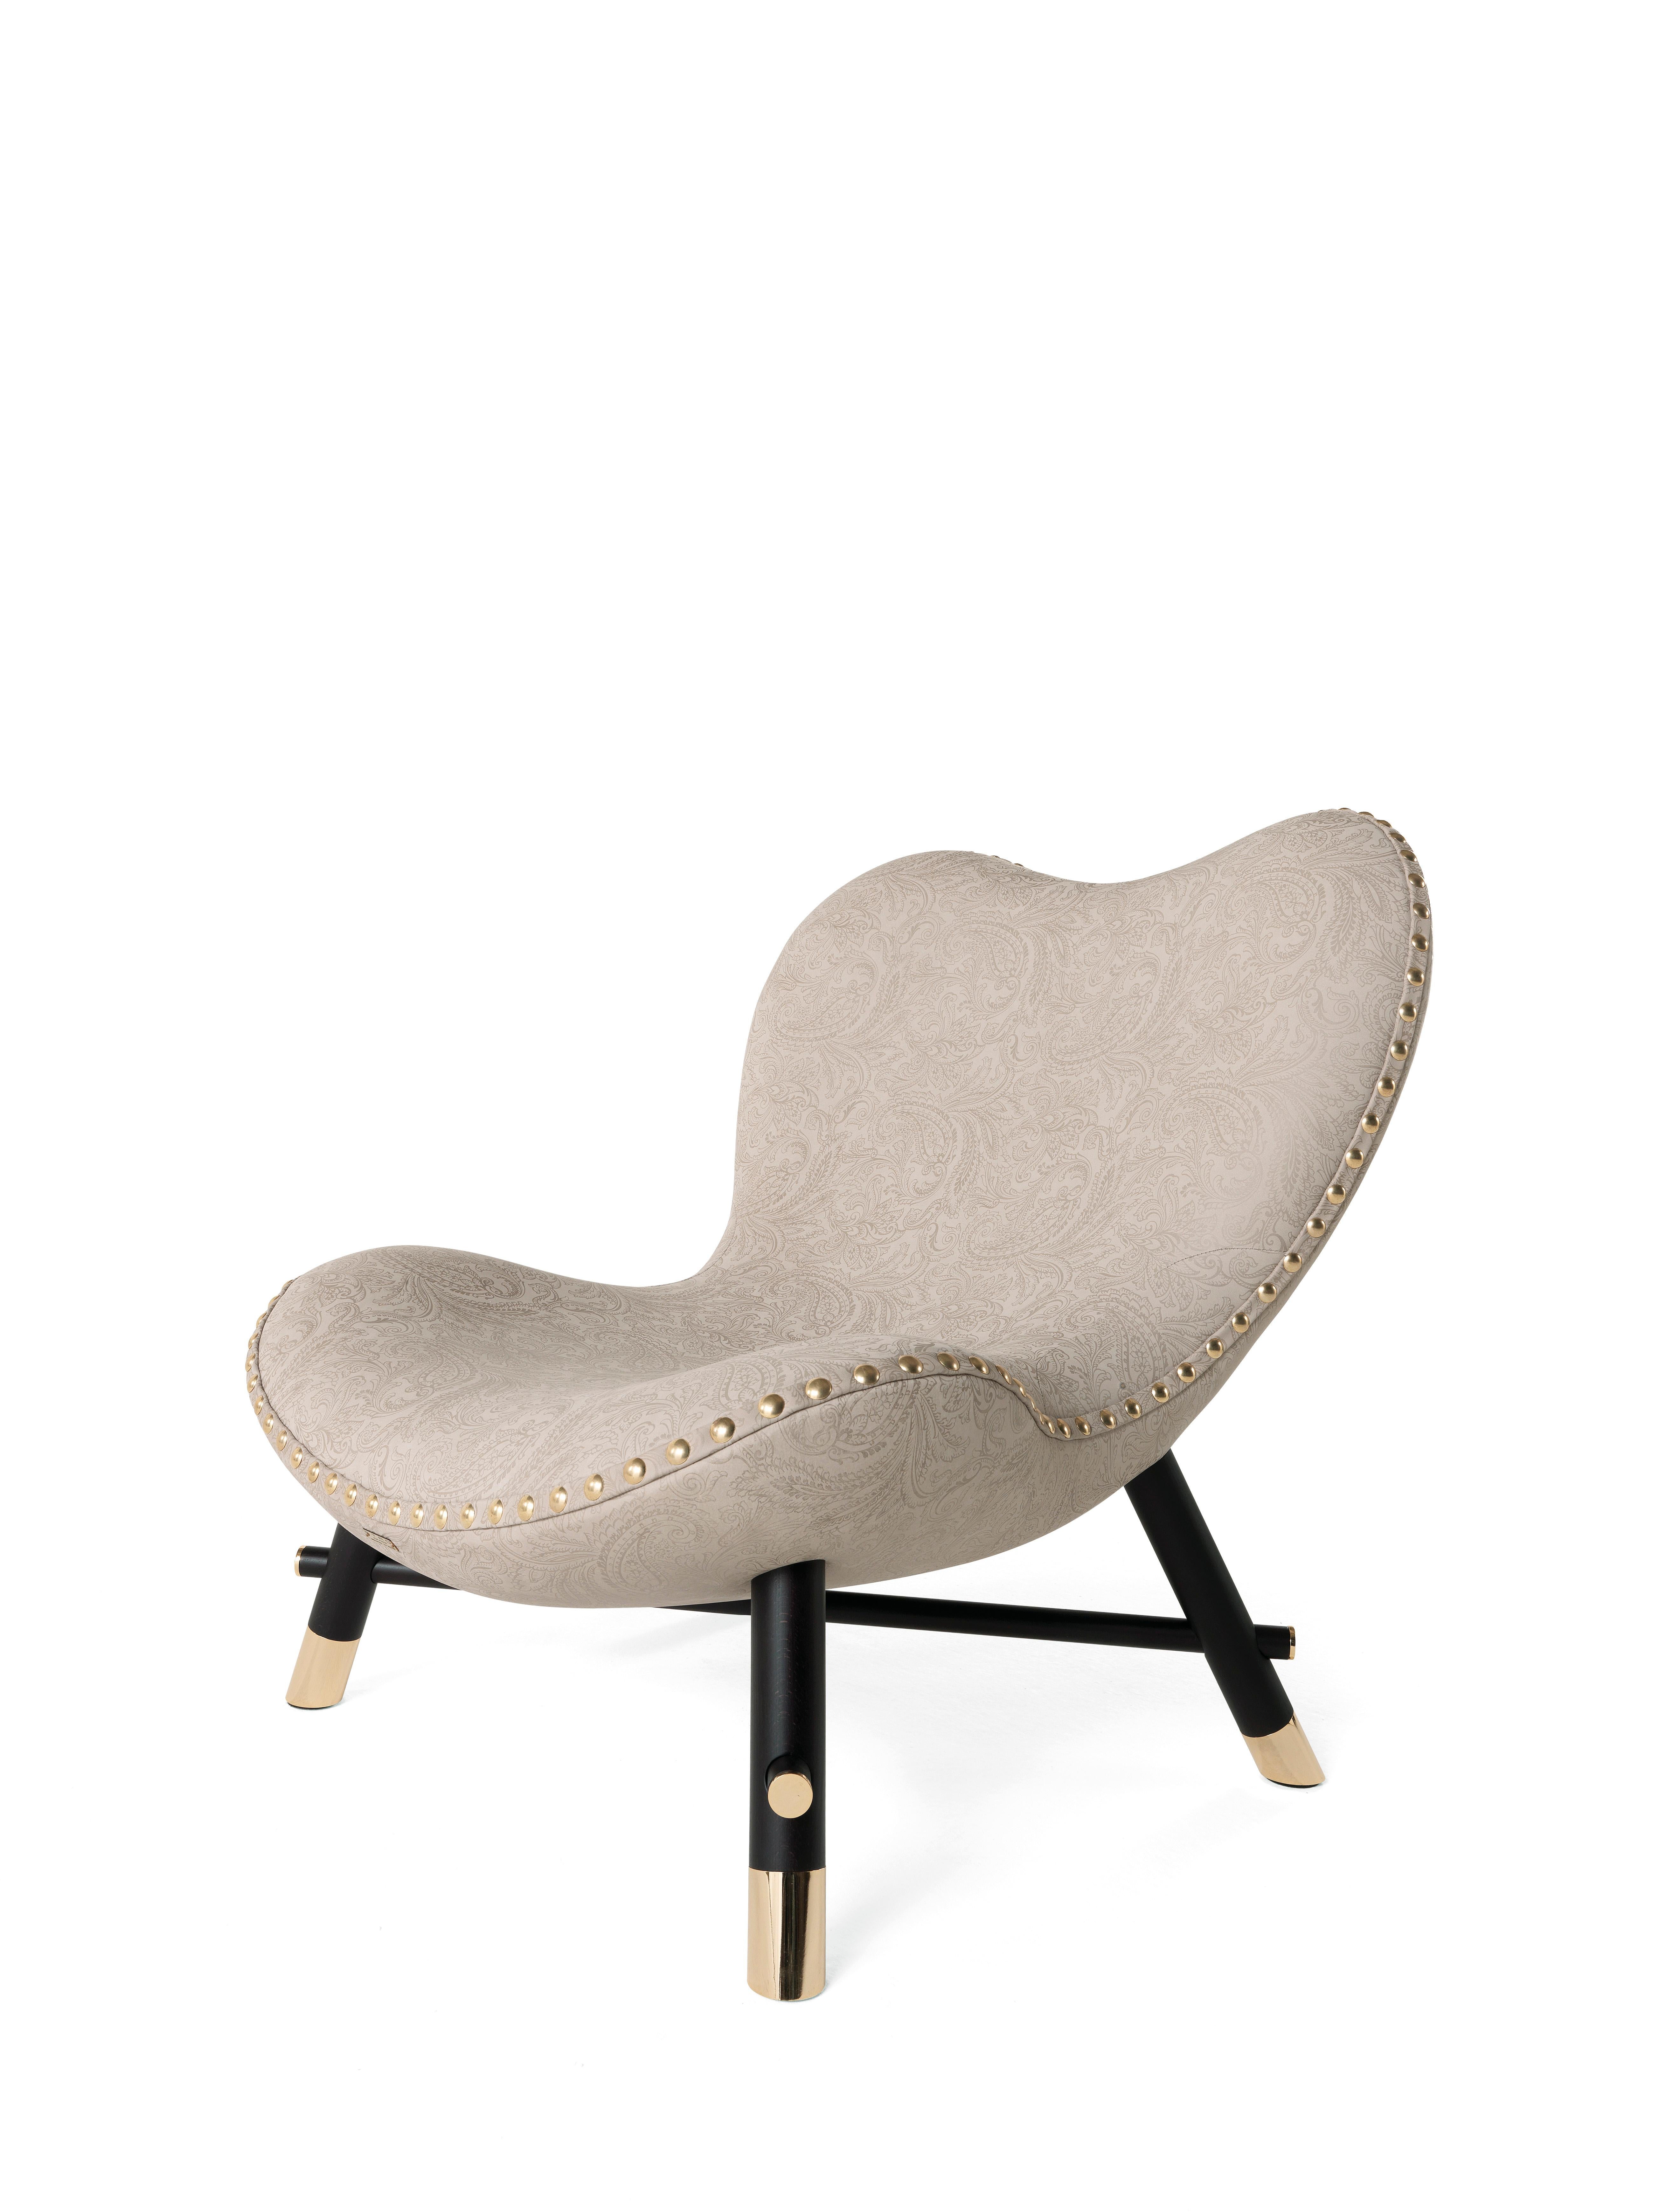 Charm and comfort come together in the Kush armchair. The piece of furniture is upholstered in printed shell nubuck leather with tone-on-tone Paisley print, a
warm and enveloping material that emphasizes its soft shapes.
The profiles are enhanced by